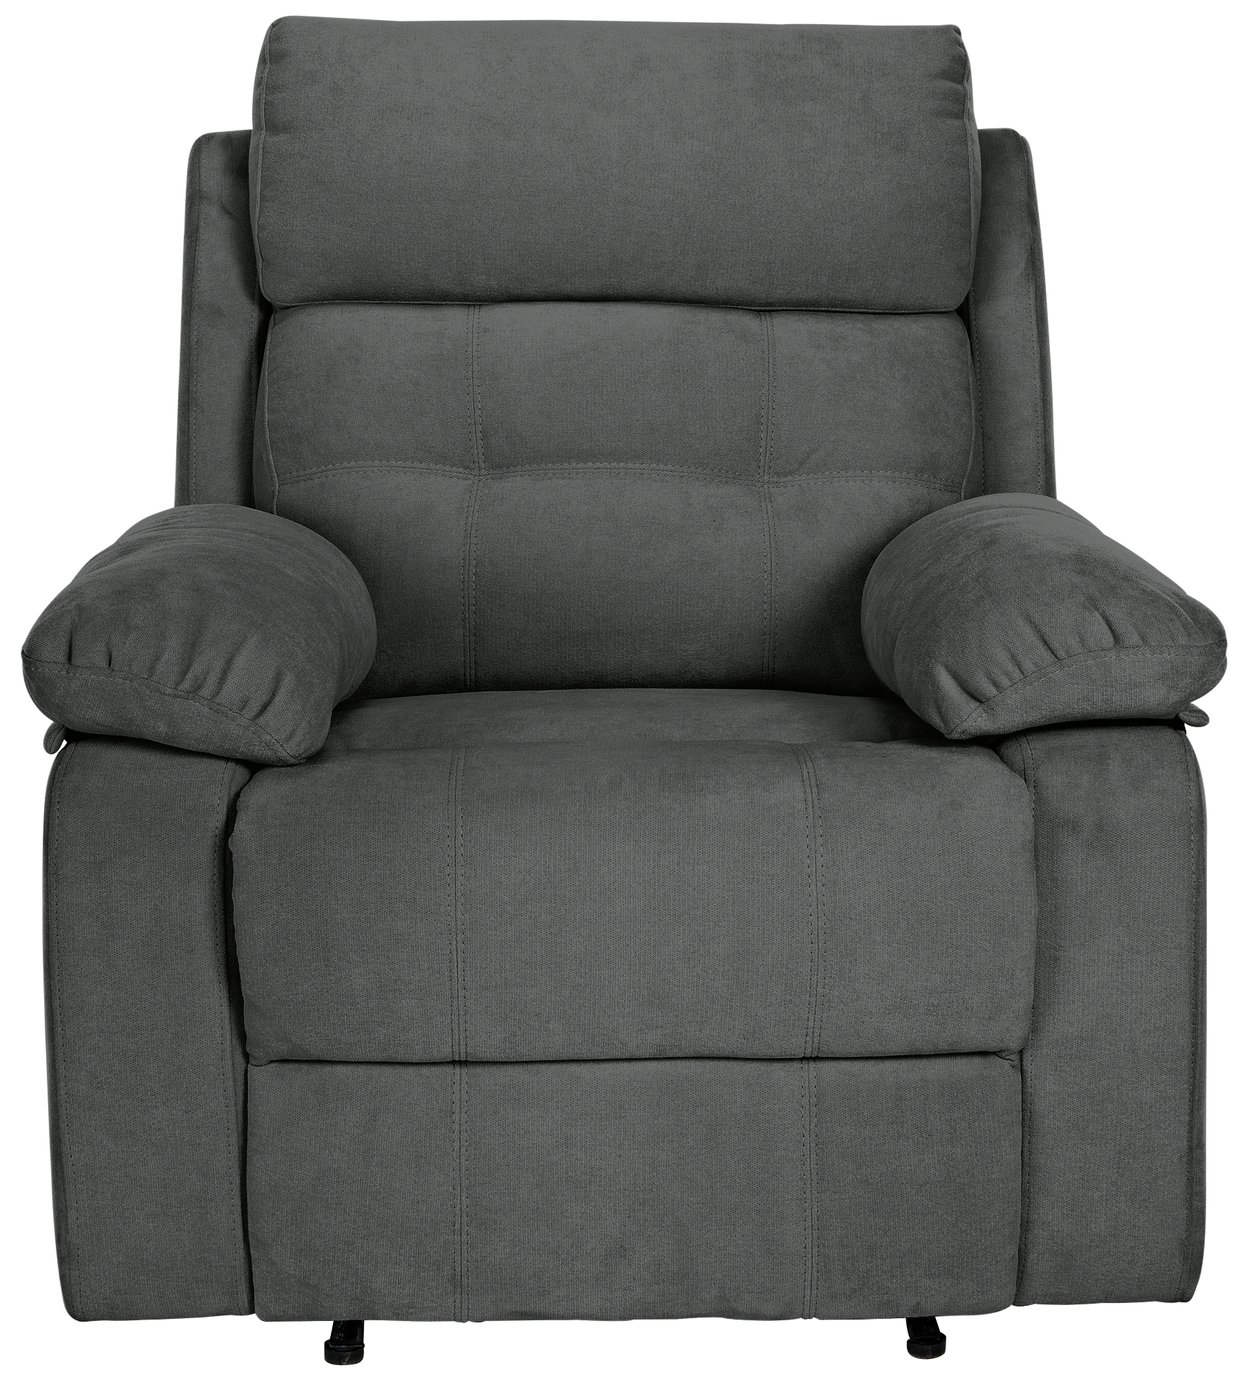 Argos Home June Fabric Manual Recliner Chair - Charcoal